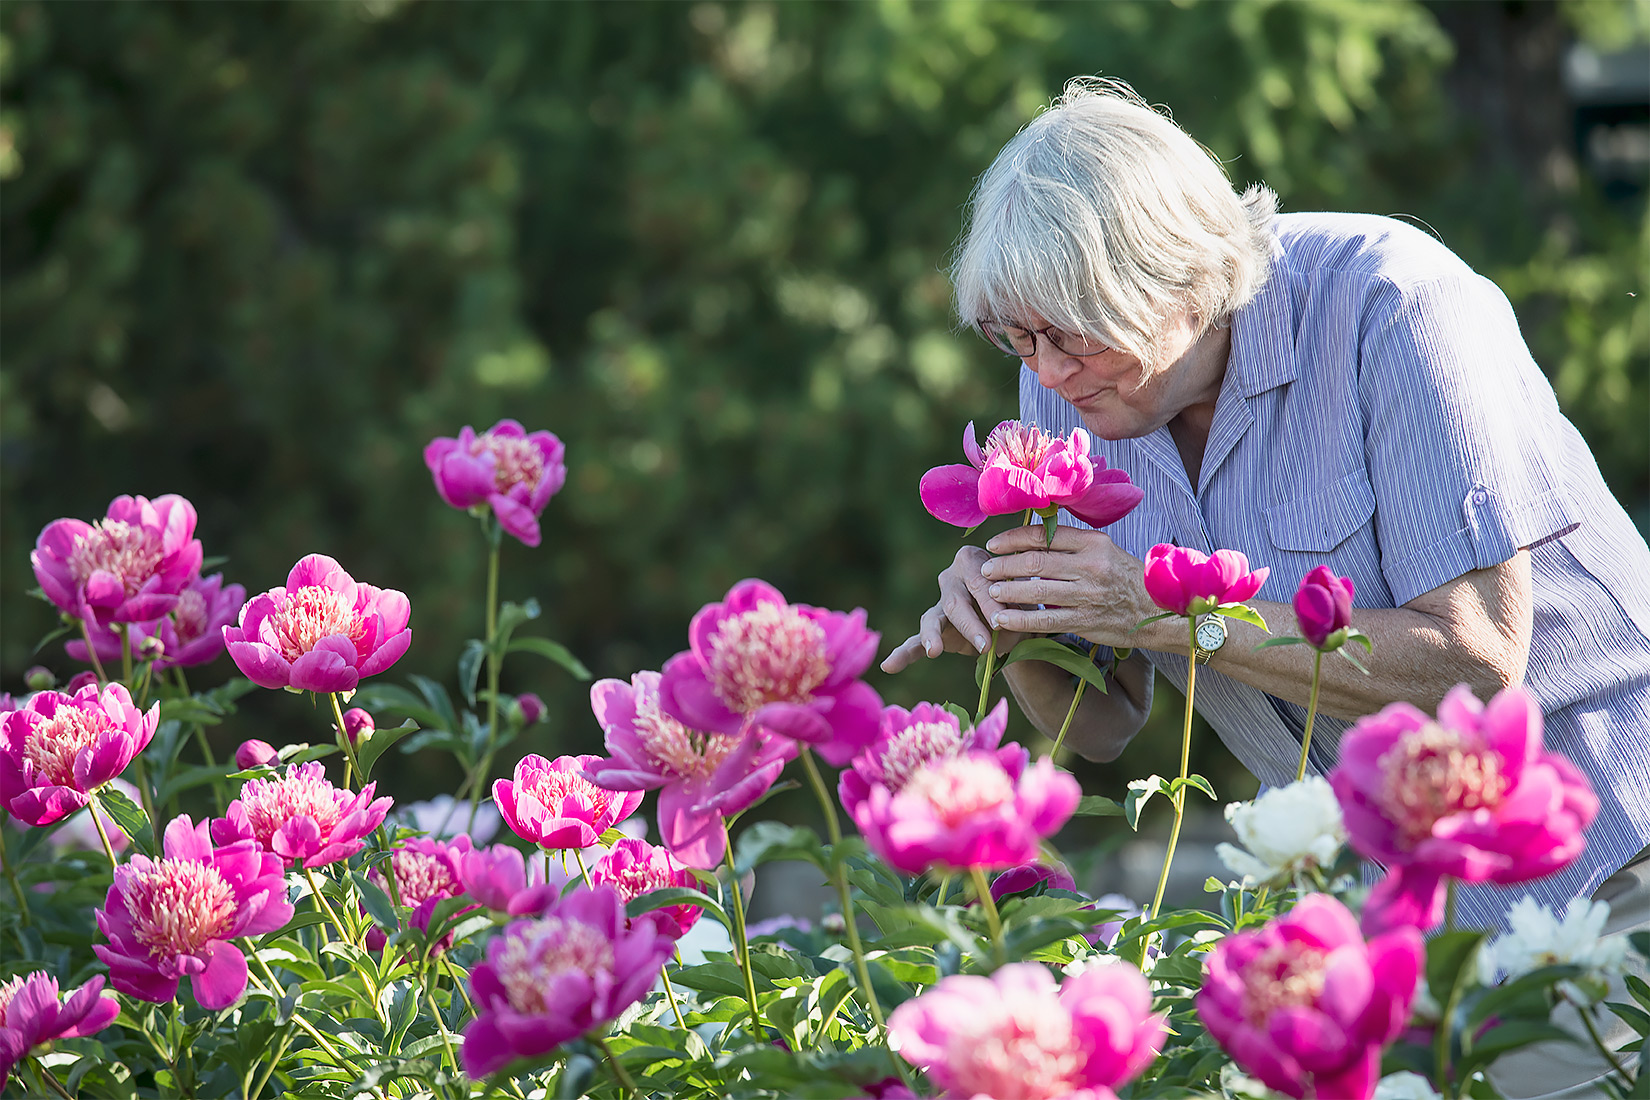 Pat Holloway, who first promoted peony production in Alaska while a UAF horticulture professor, enjoys a bloom of the Leslie Peck variety in early July 2017 at the Georgeson Botanical Garden. UAF photo by JR Ancheta.